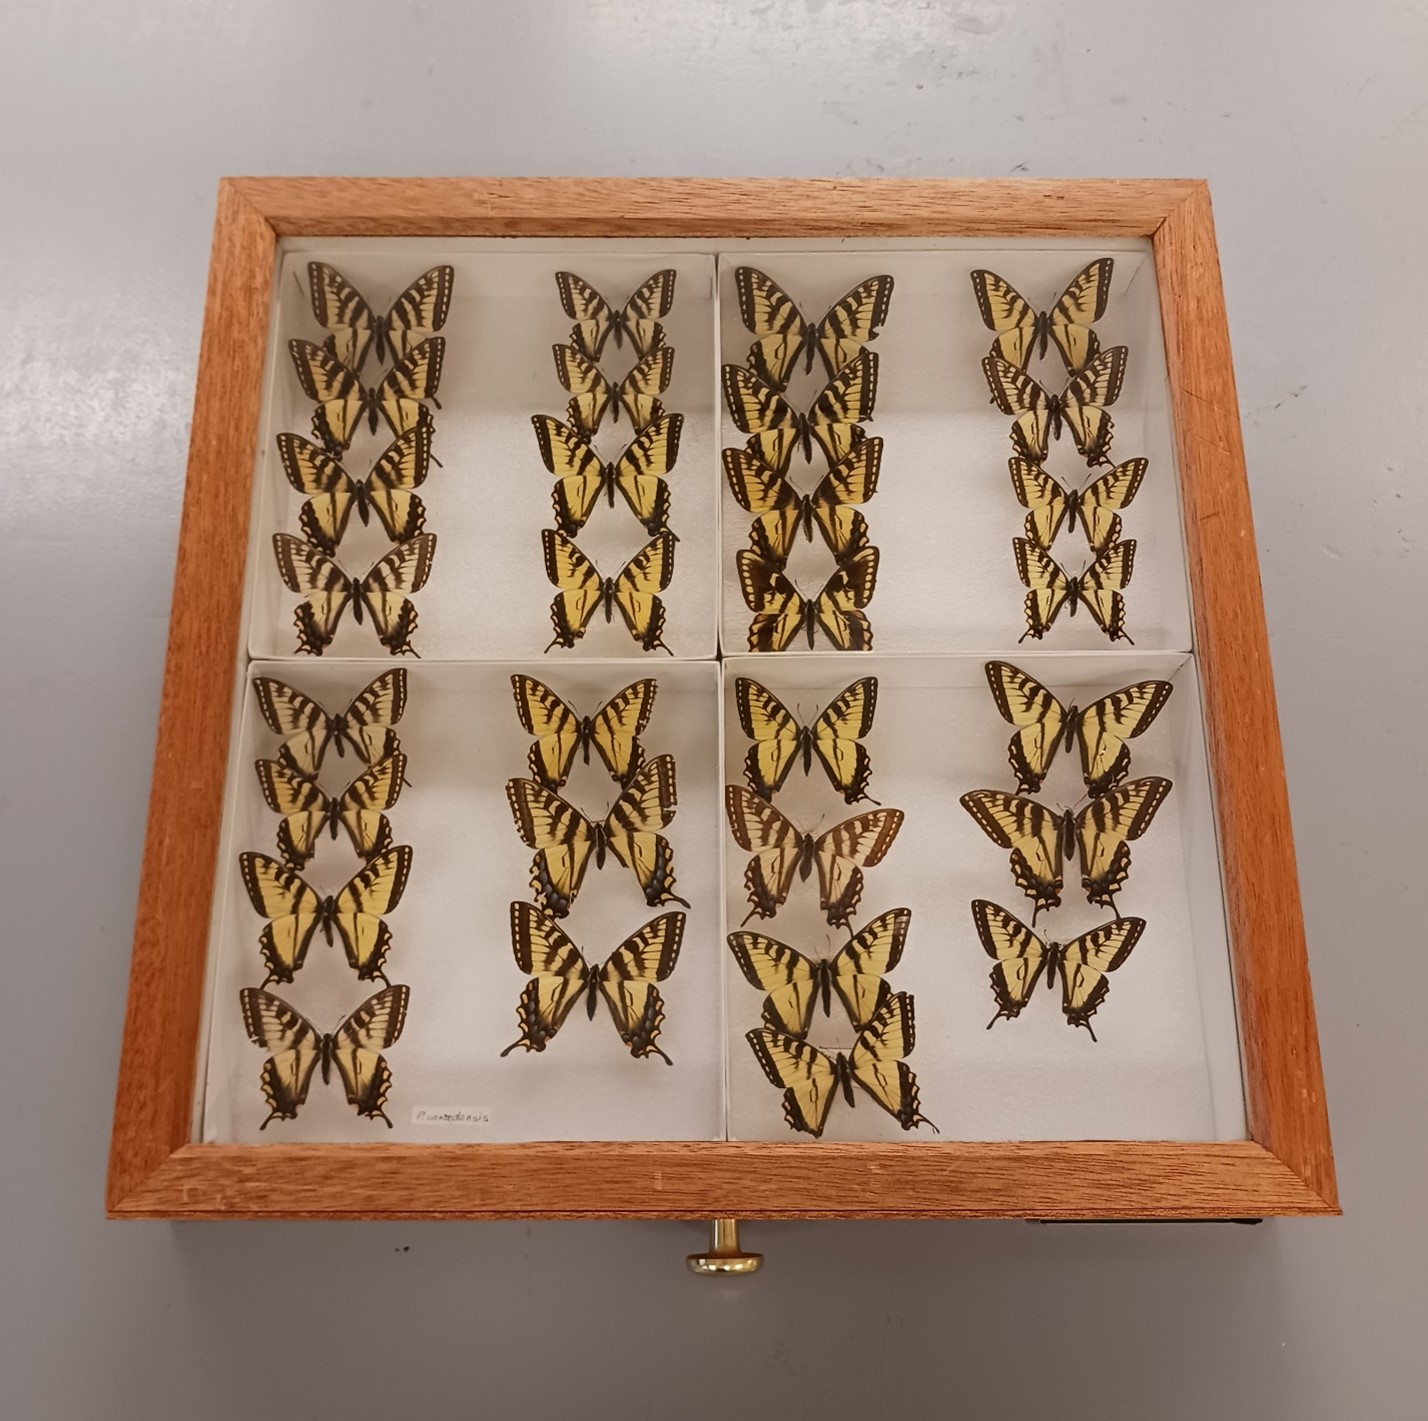 The repaired lid on a specimen drawer, enclosing multiple taxidermied yellow butterflies.